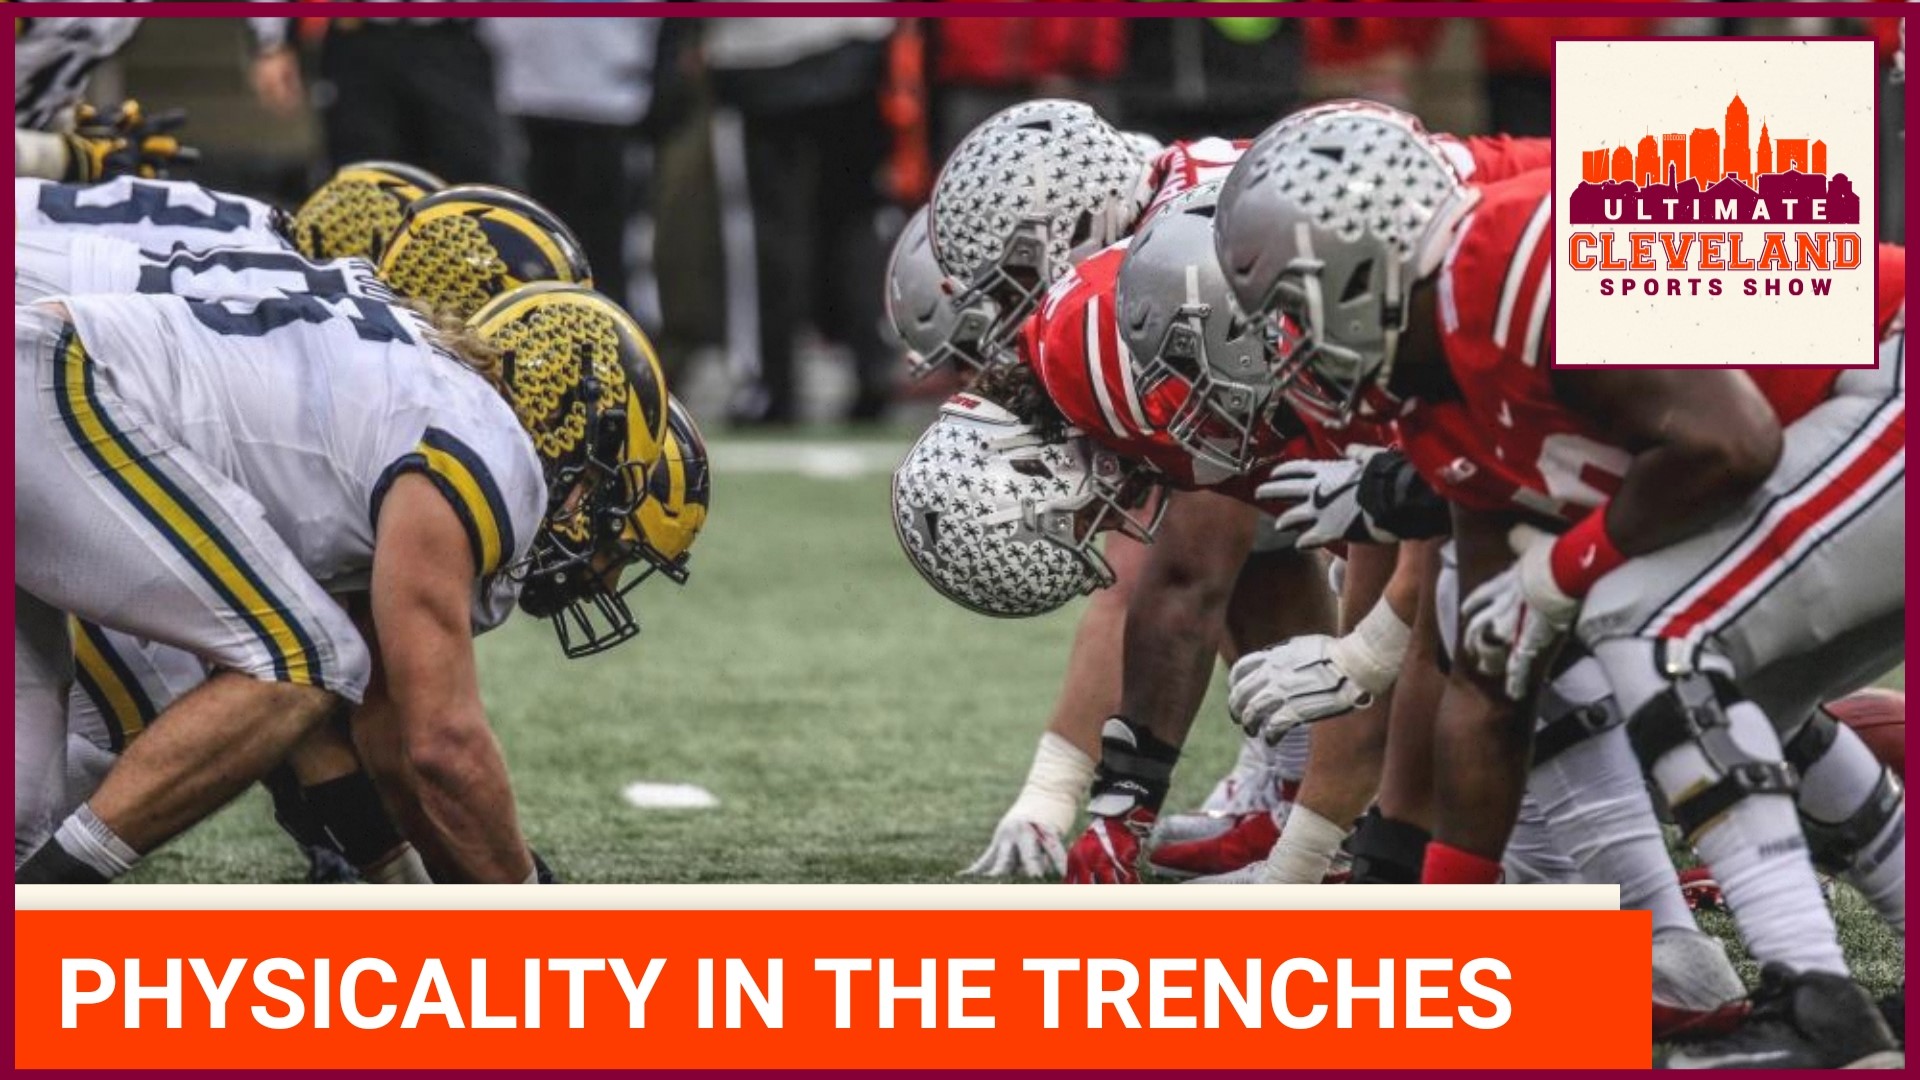 OSU play-by-play guy Paul Keels believes that for the Buckeyes to win the BIG GAME, Ohio State must be physical in the trenches.